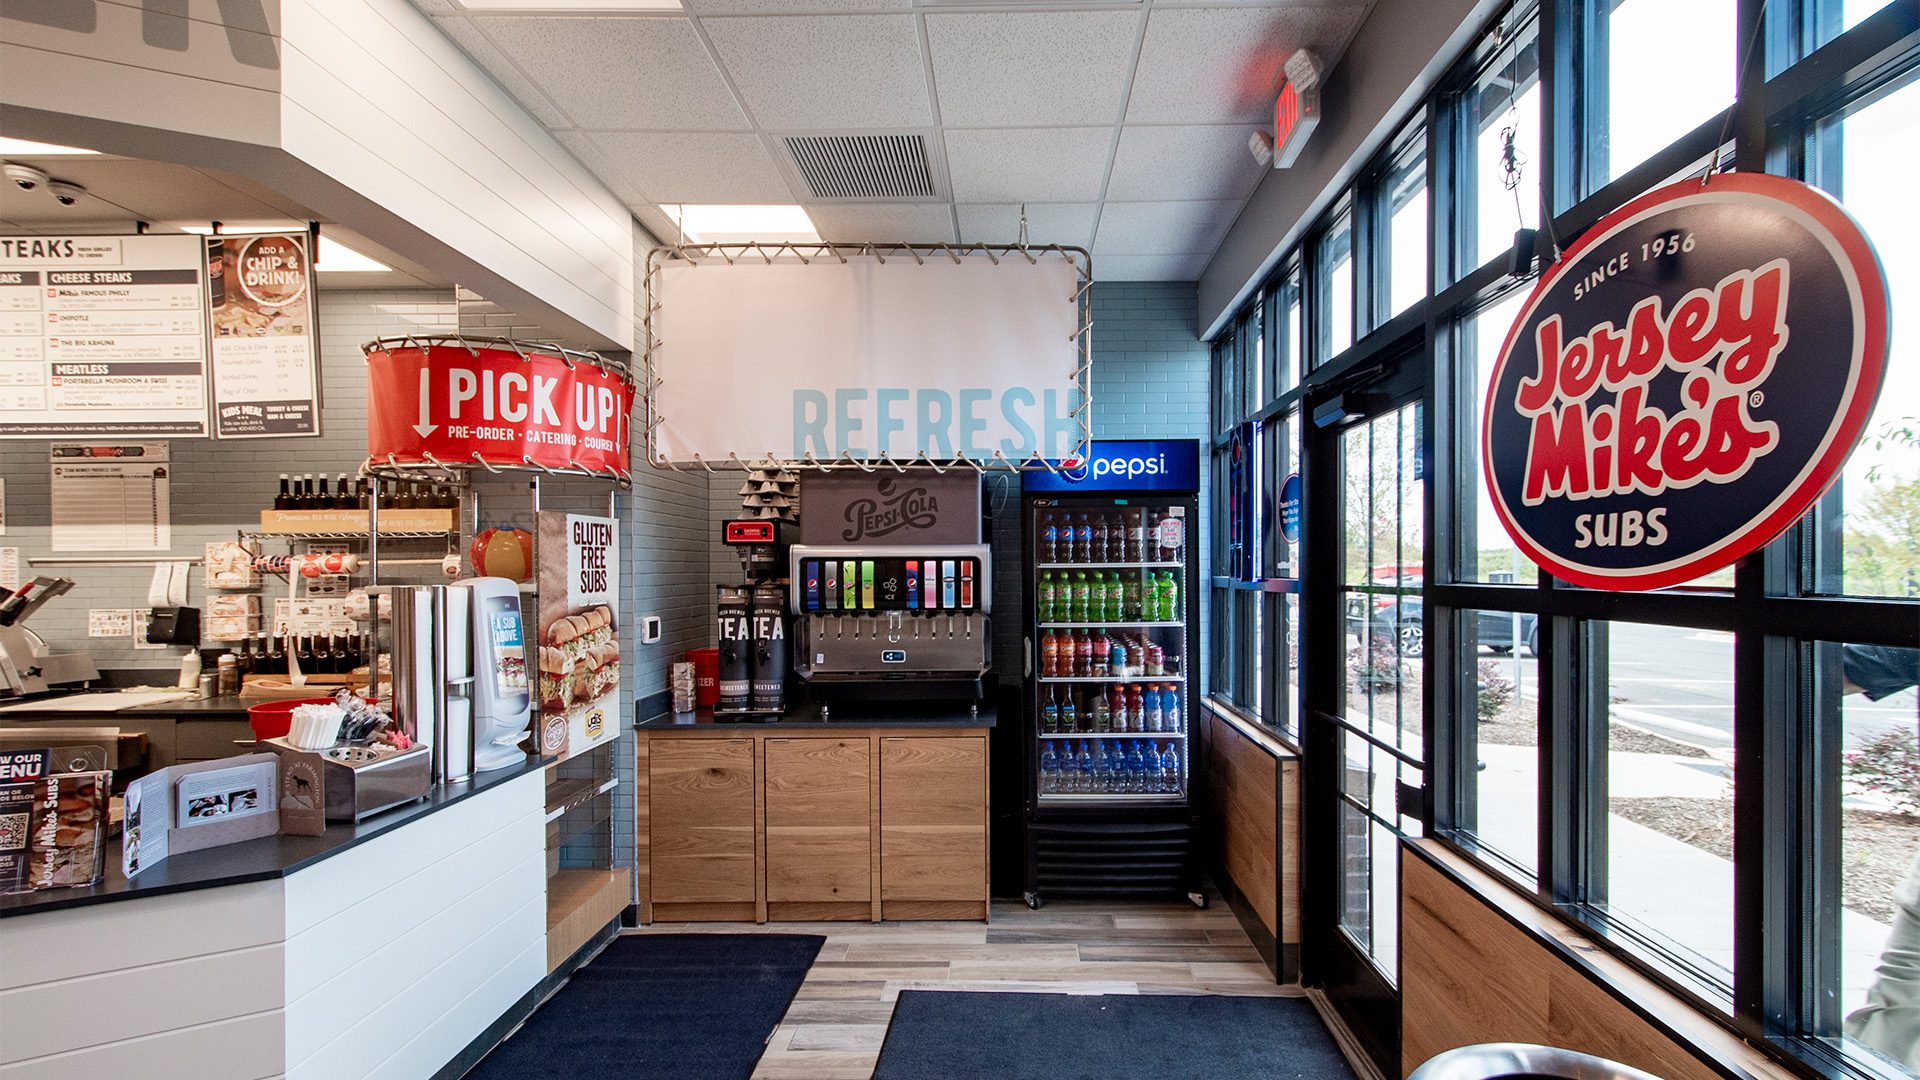 Jersey Mike's Subs interior at Farmington with drink station and pickup counter